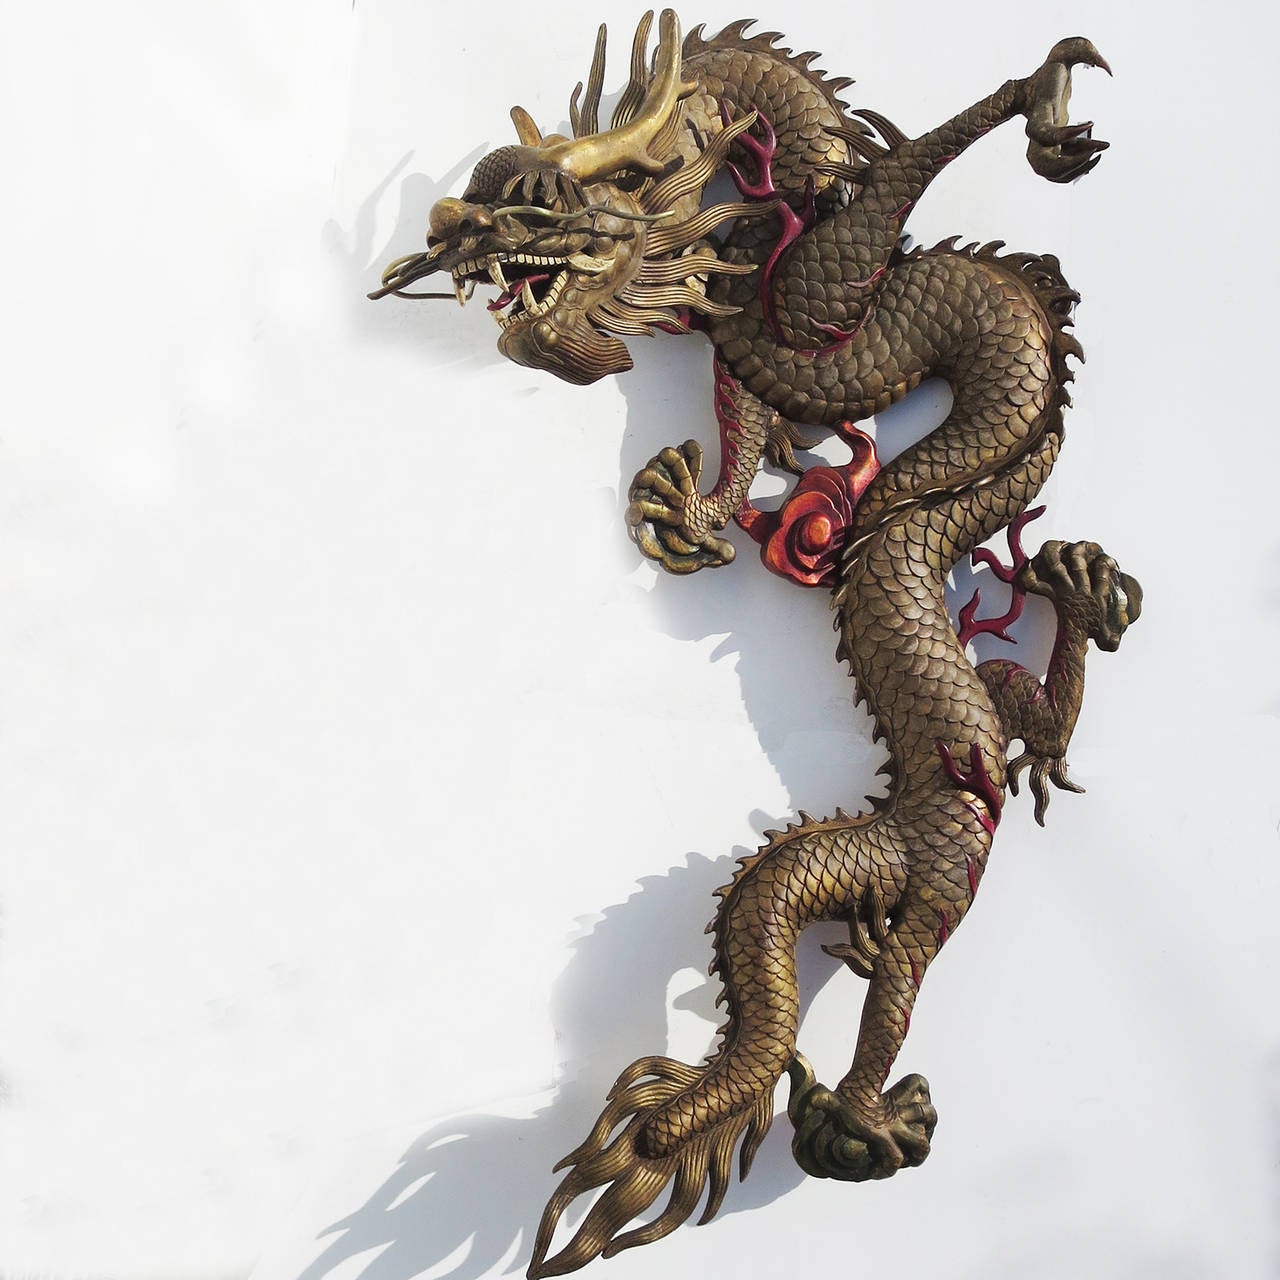 A fantastic depiction of a Chinese dragon in an impressive scale. Most likely made for a Chinese themed theater or restaurant, the figure is completely carved of wood, and finished in a gold painted surface. The finish has darkened over the years to